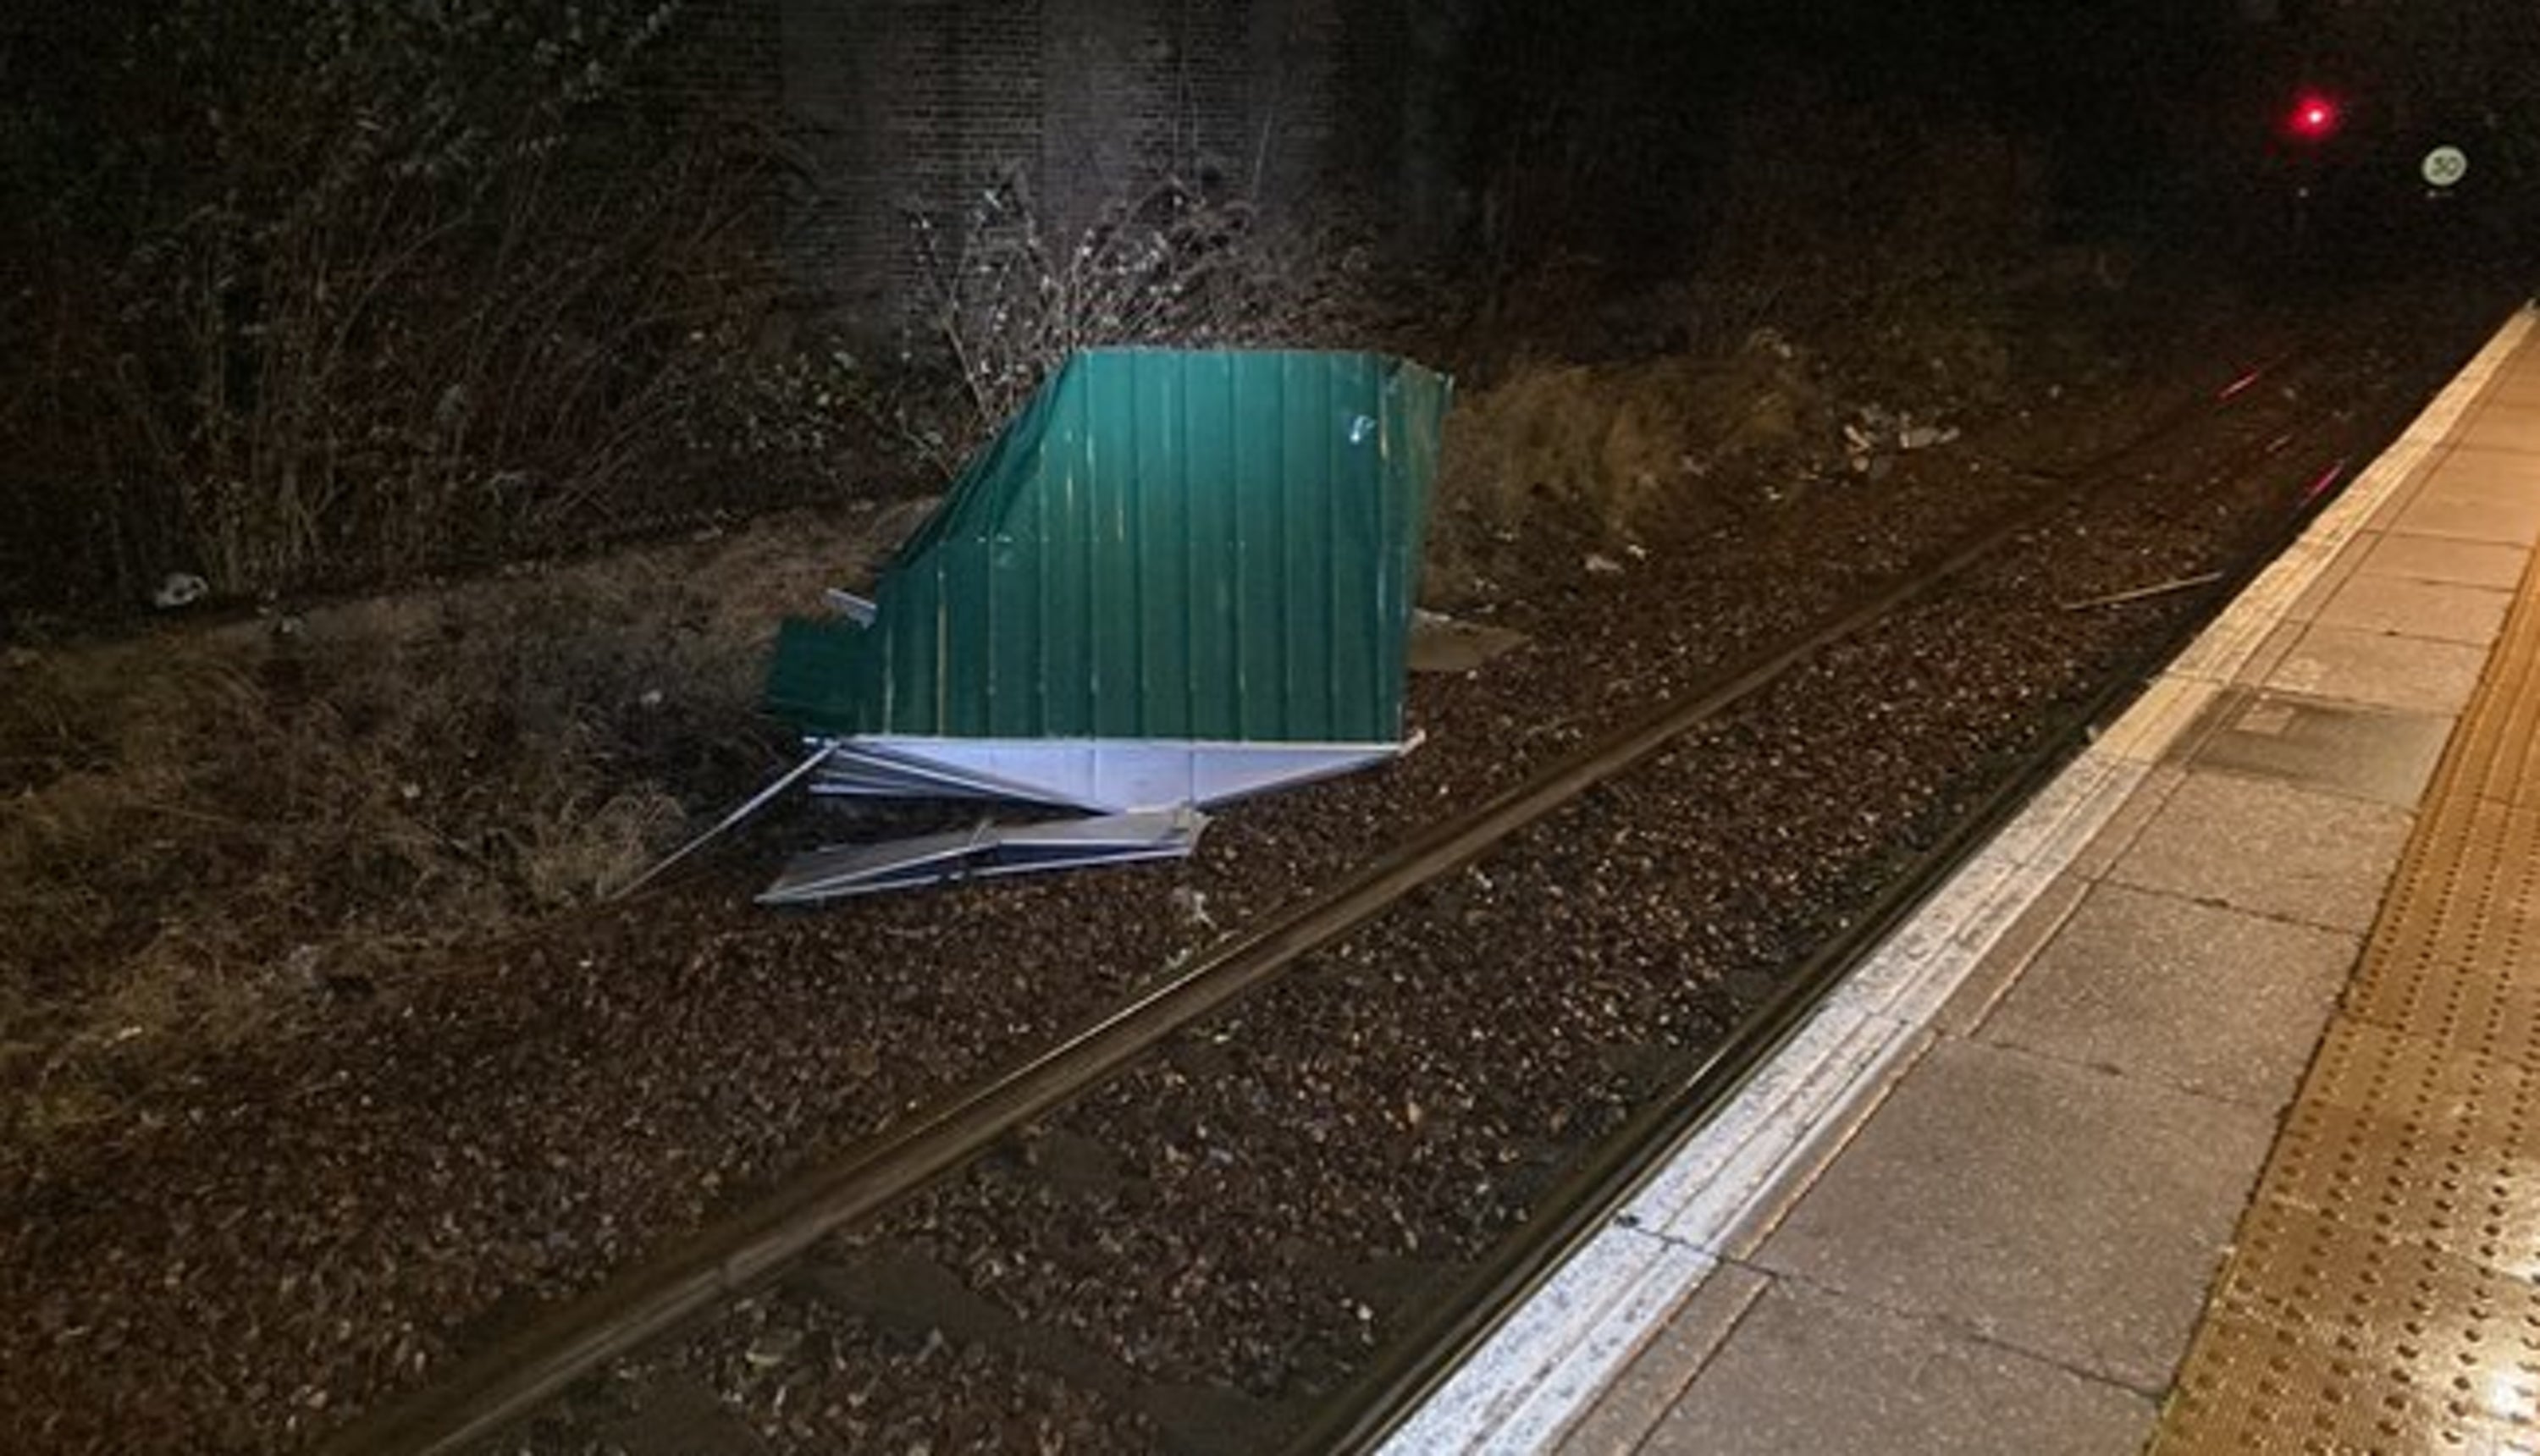 Garden shed on the line at Bellgrove station in Glasgow